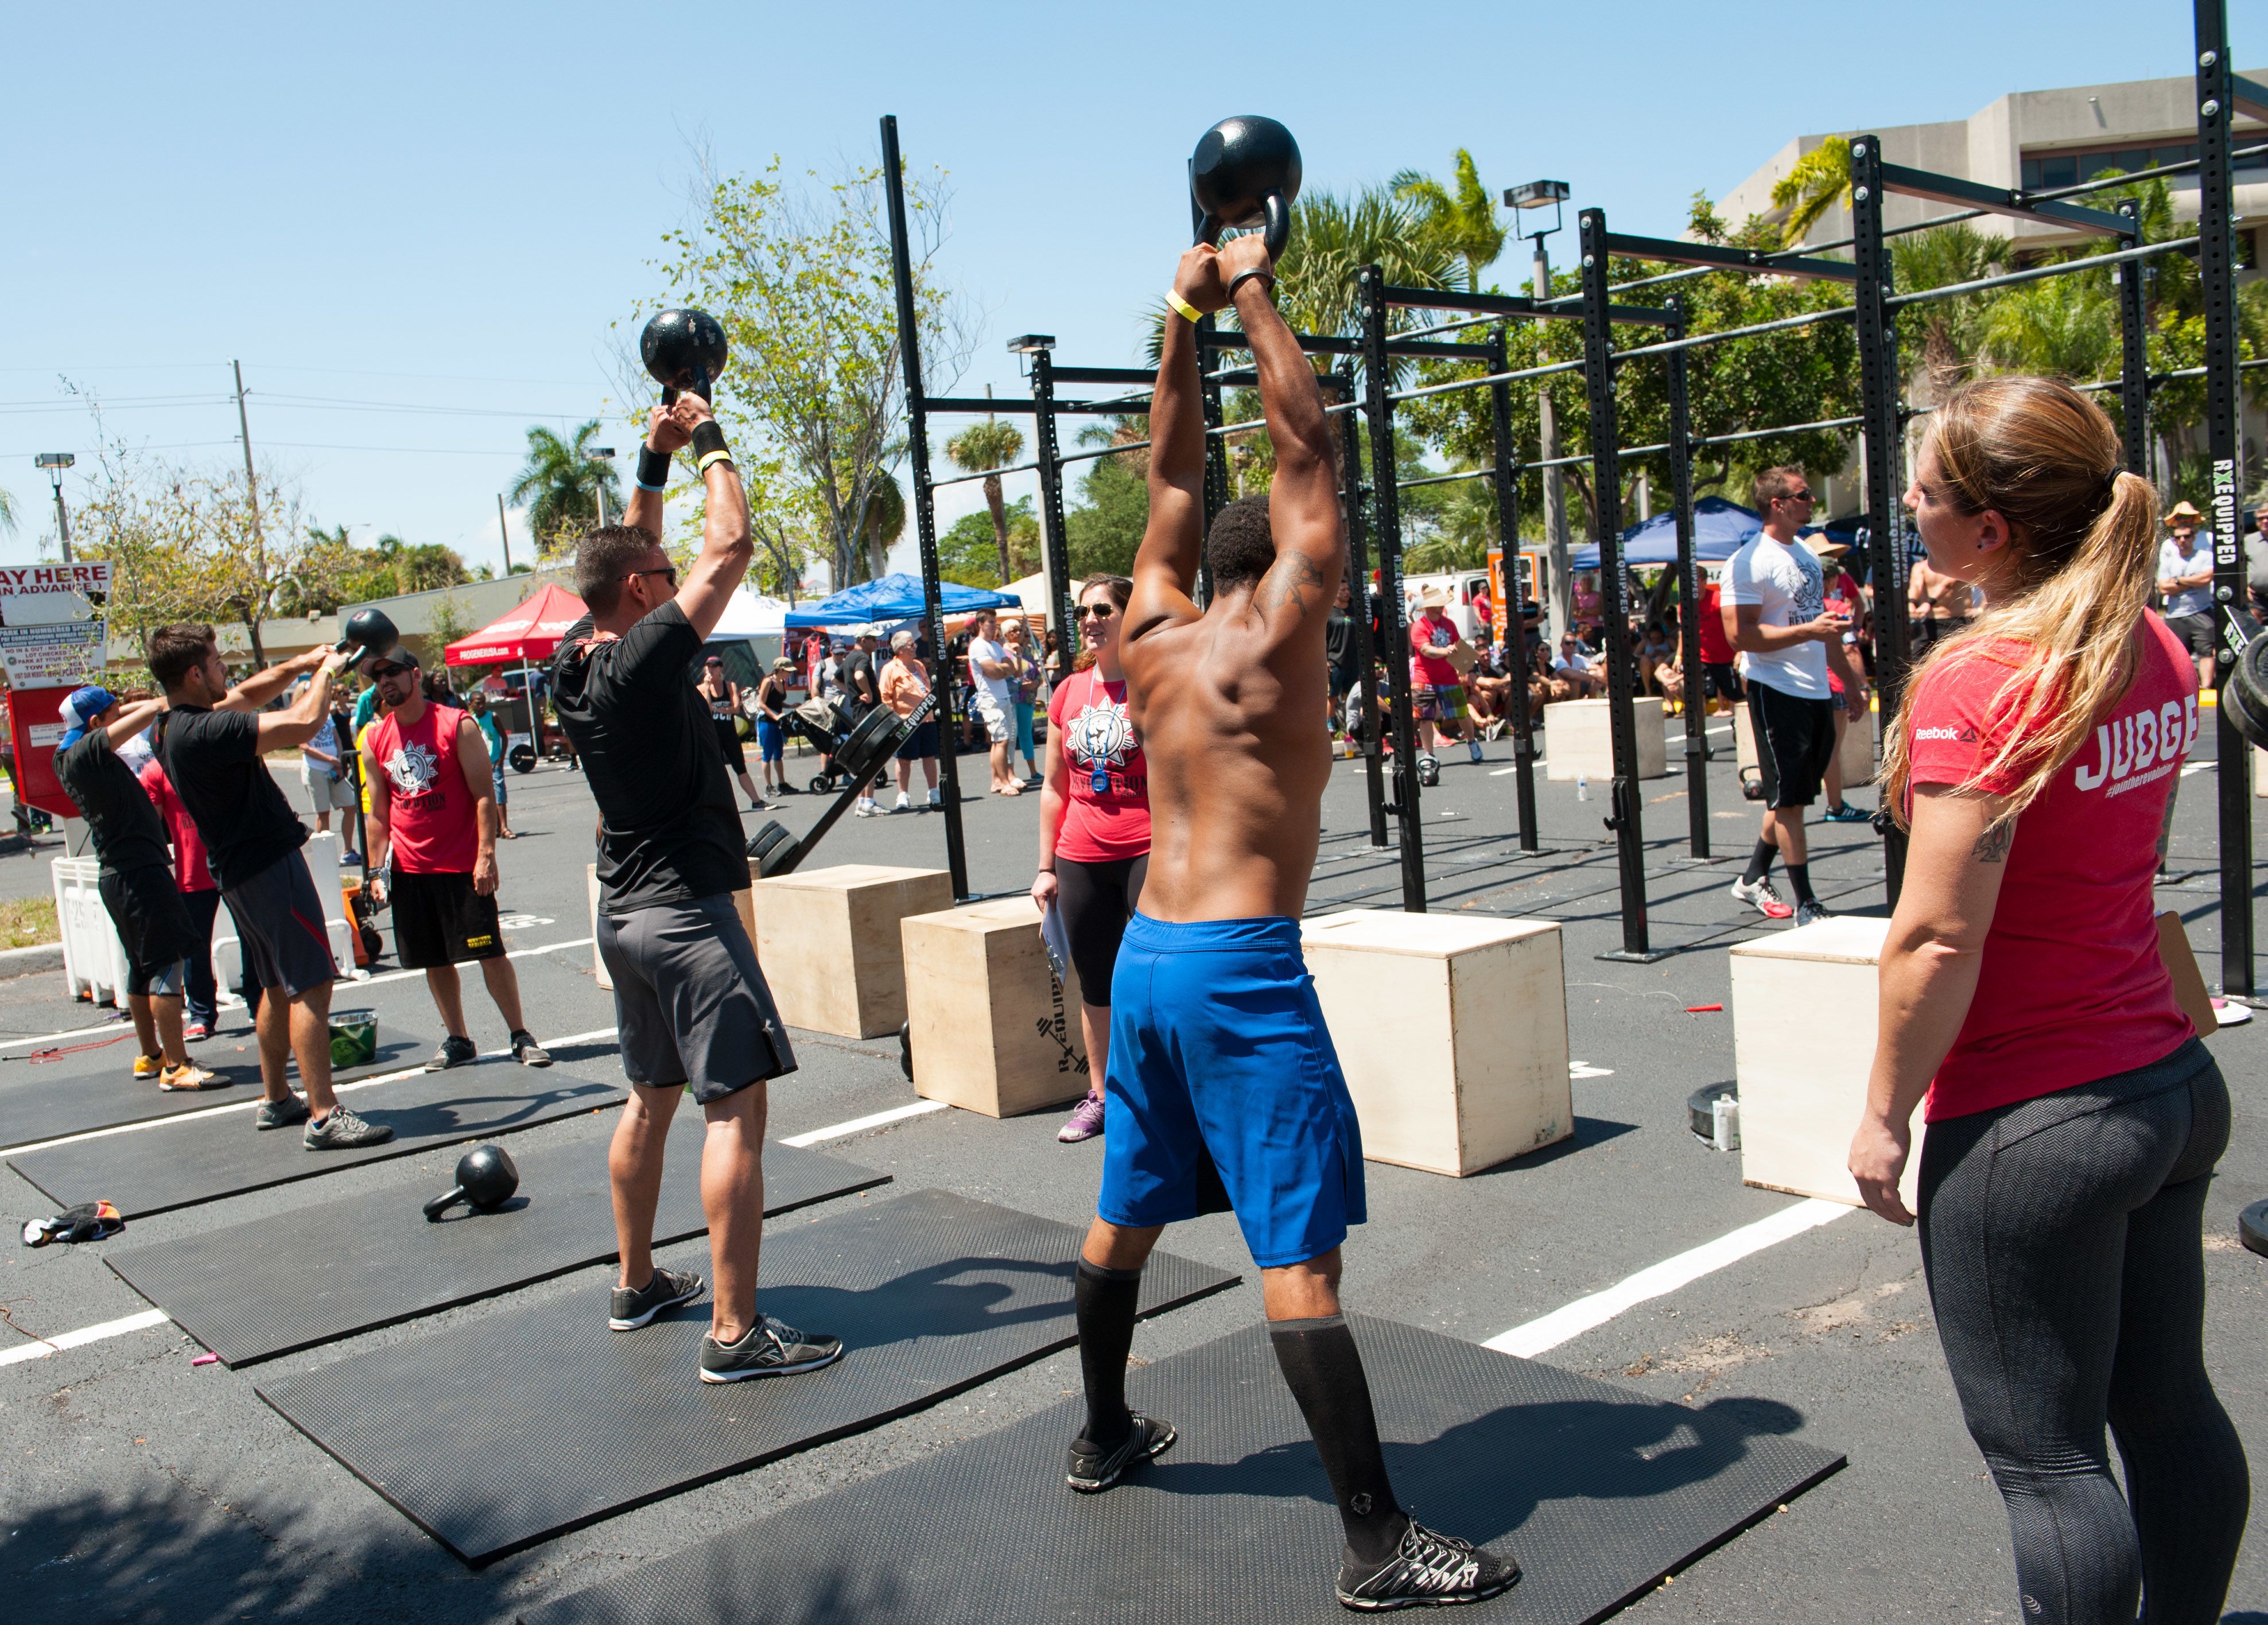 automatisk kabine Betydelig Everything We Know About the 2020 CrossFit Games